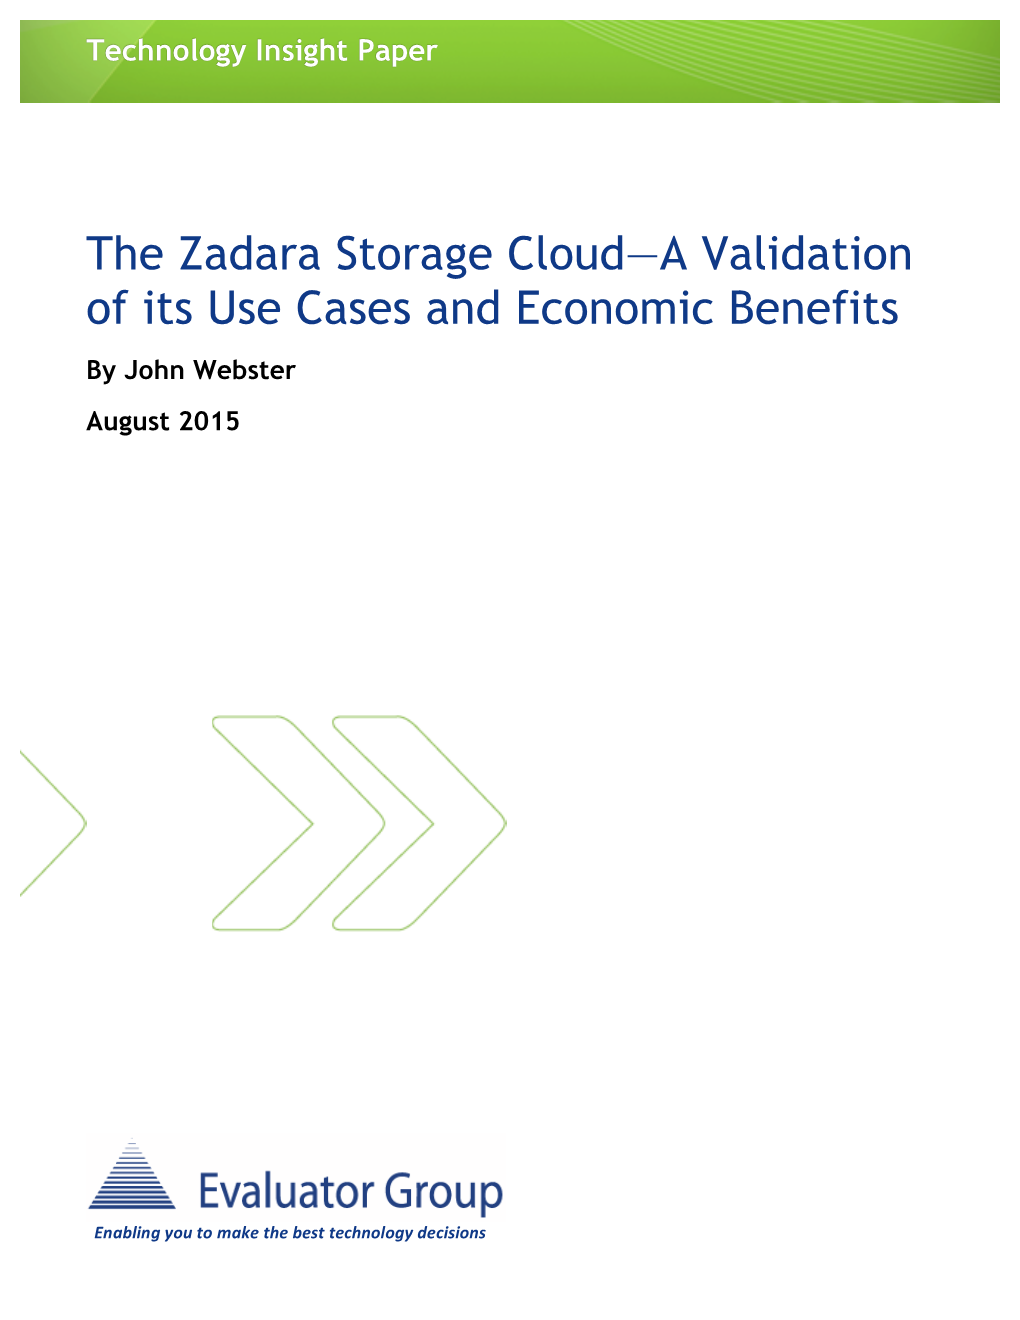 The Zadara Storage Cloud—A Validation of Its Use Cases and Economic Benefits by John Webster August 2015